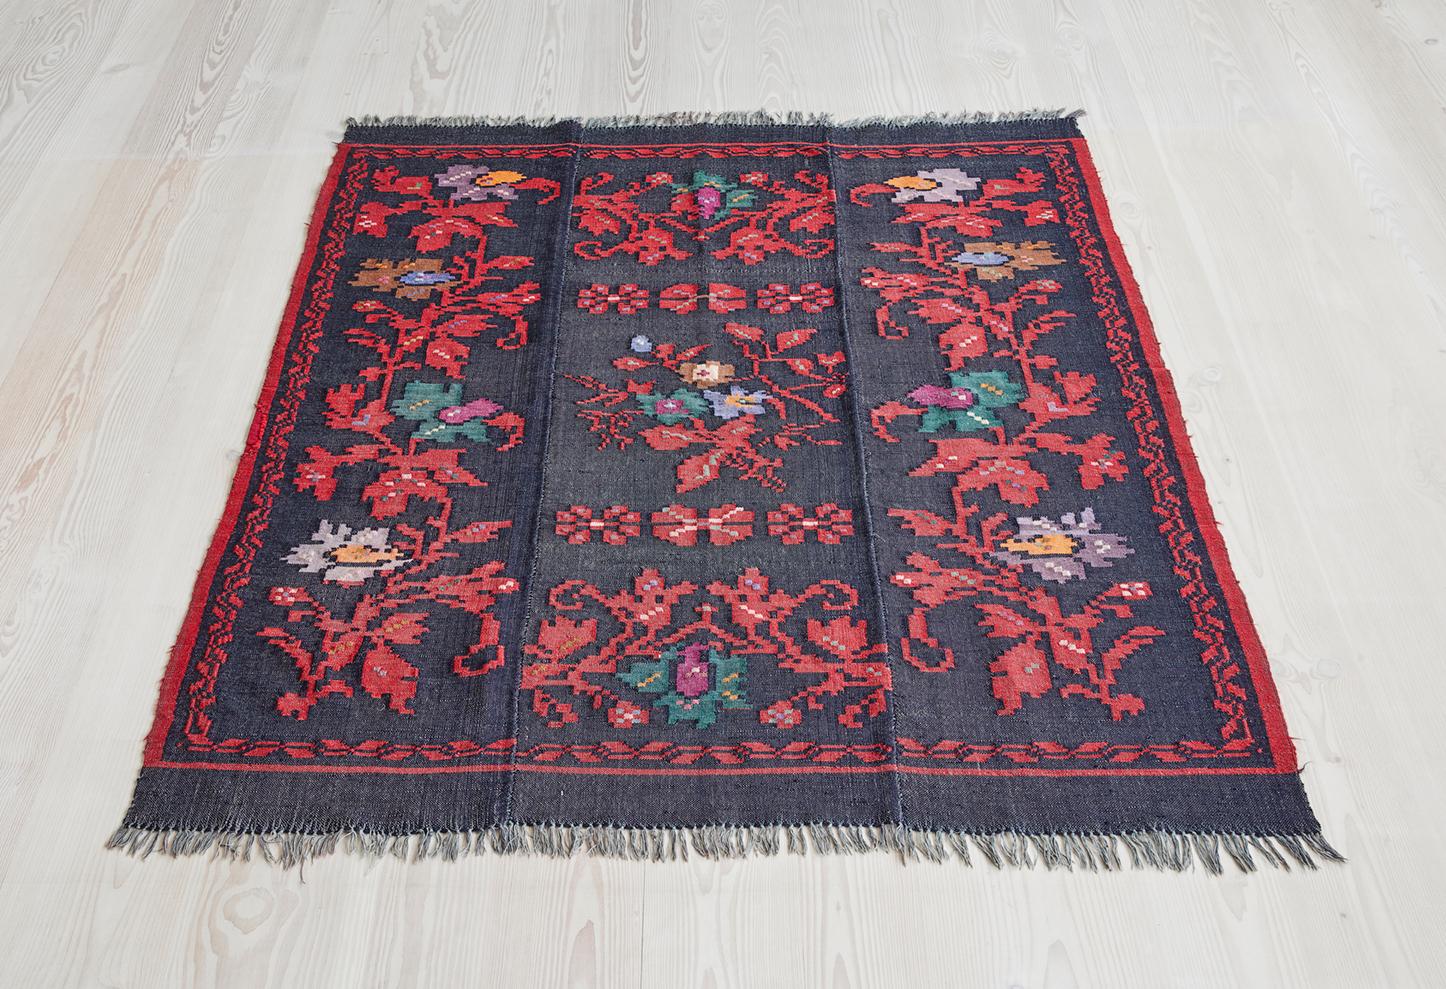 Traditional Greek handwoven flat-weave rug with fringes. Beautiful flower pattern in the colors of maroon, purple, orange and green.